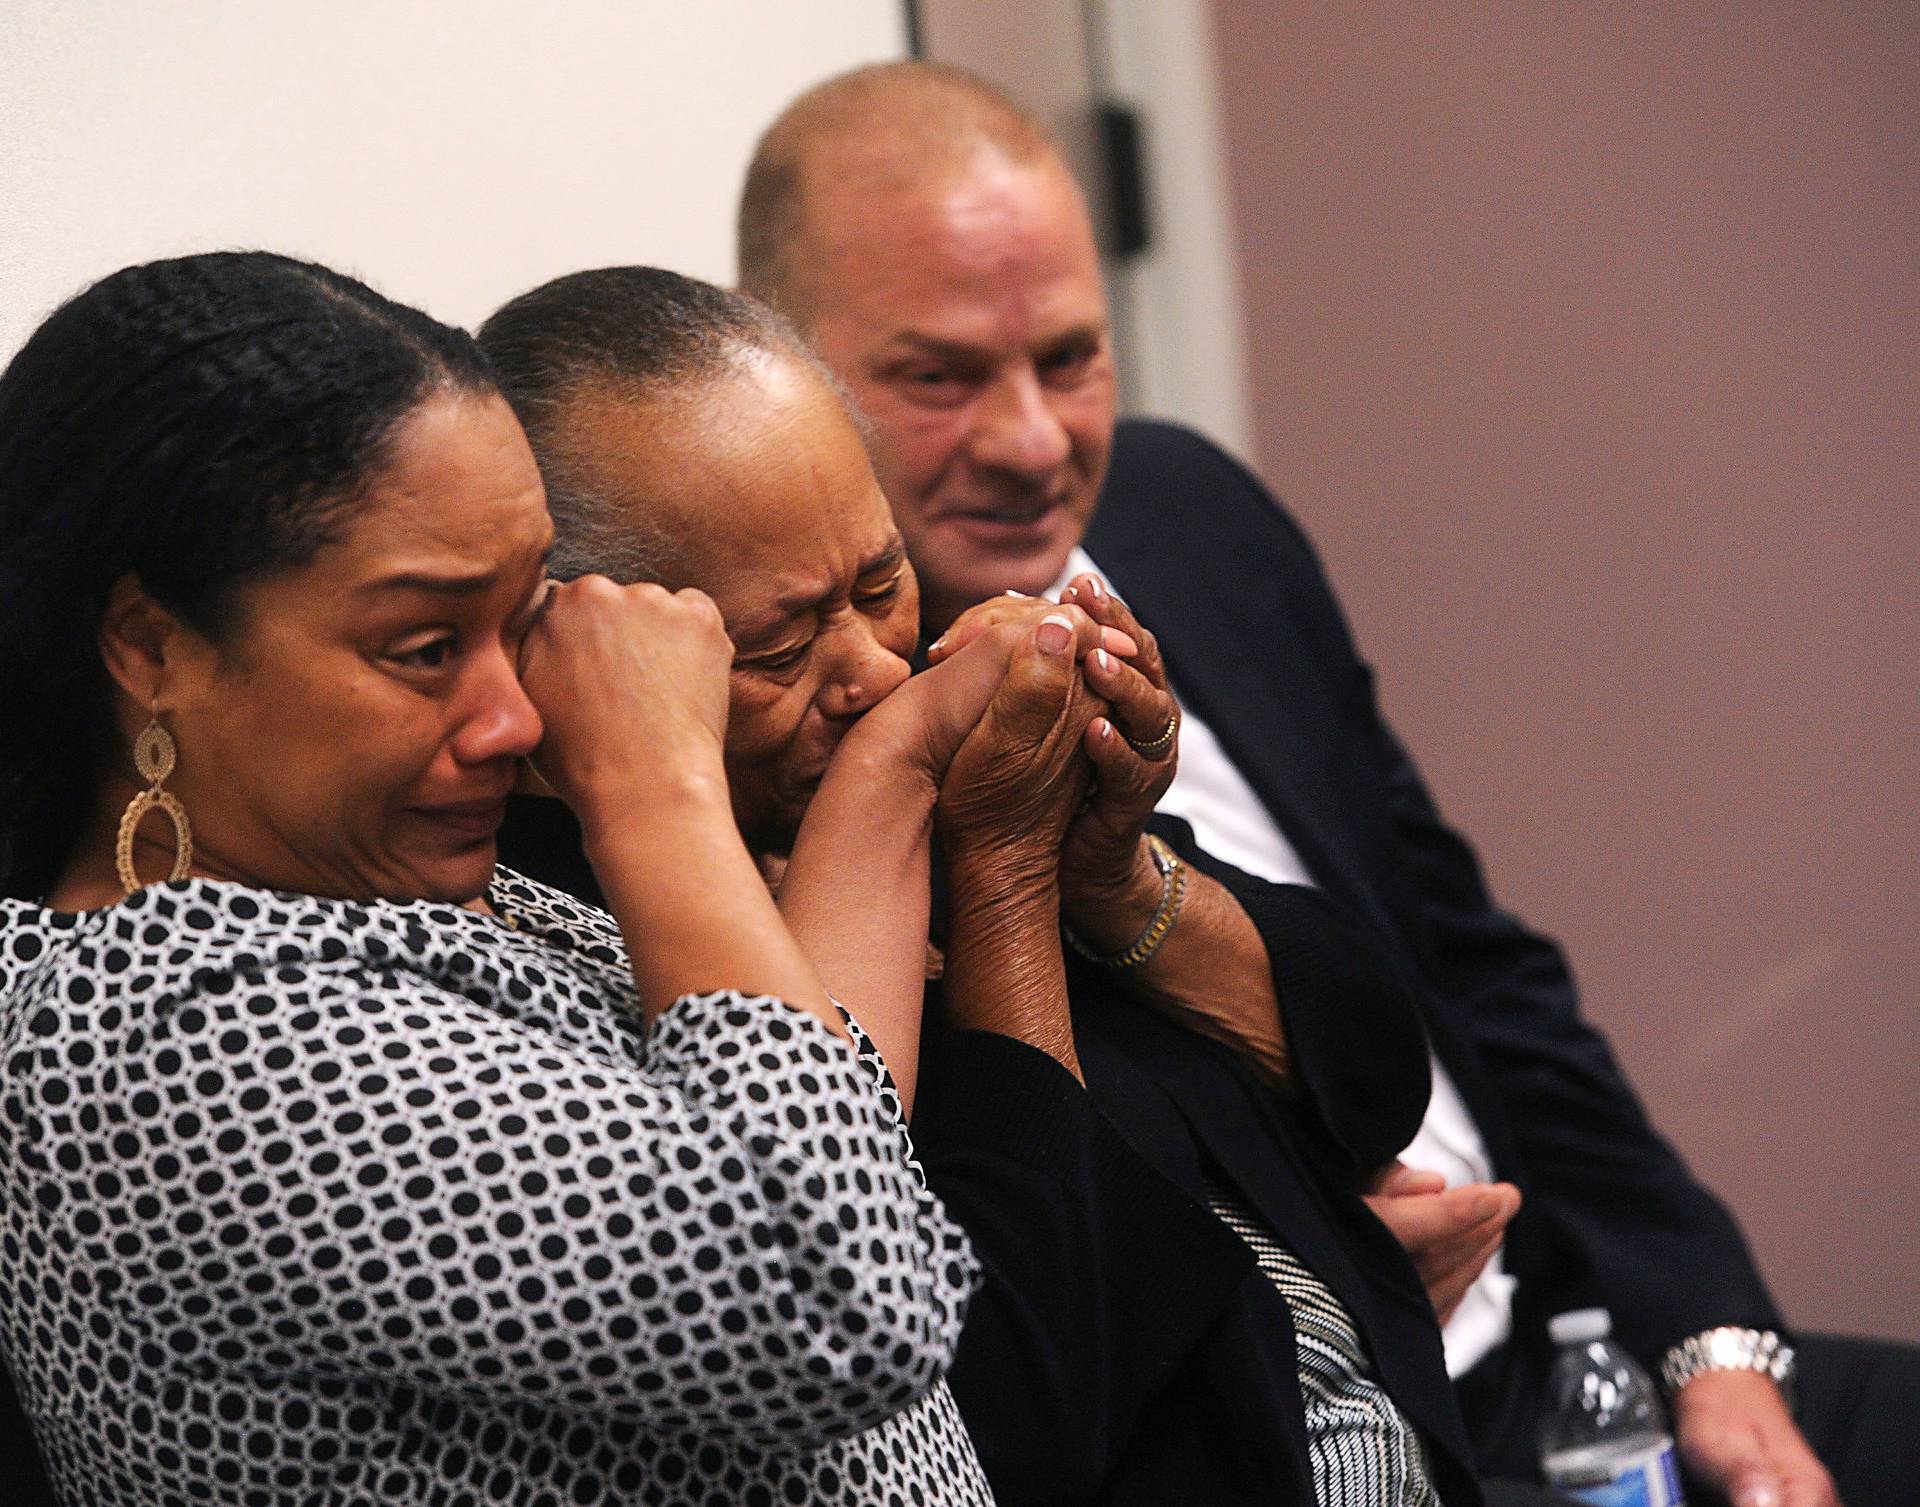 O.J. Simpson's sister Shirley Baker, (center), daughter Arielle Simpson, (L), and friend Tom Scotto react during Simpson's parole hearing at Lovelock Correctional Centre in Lovelock